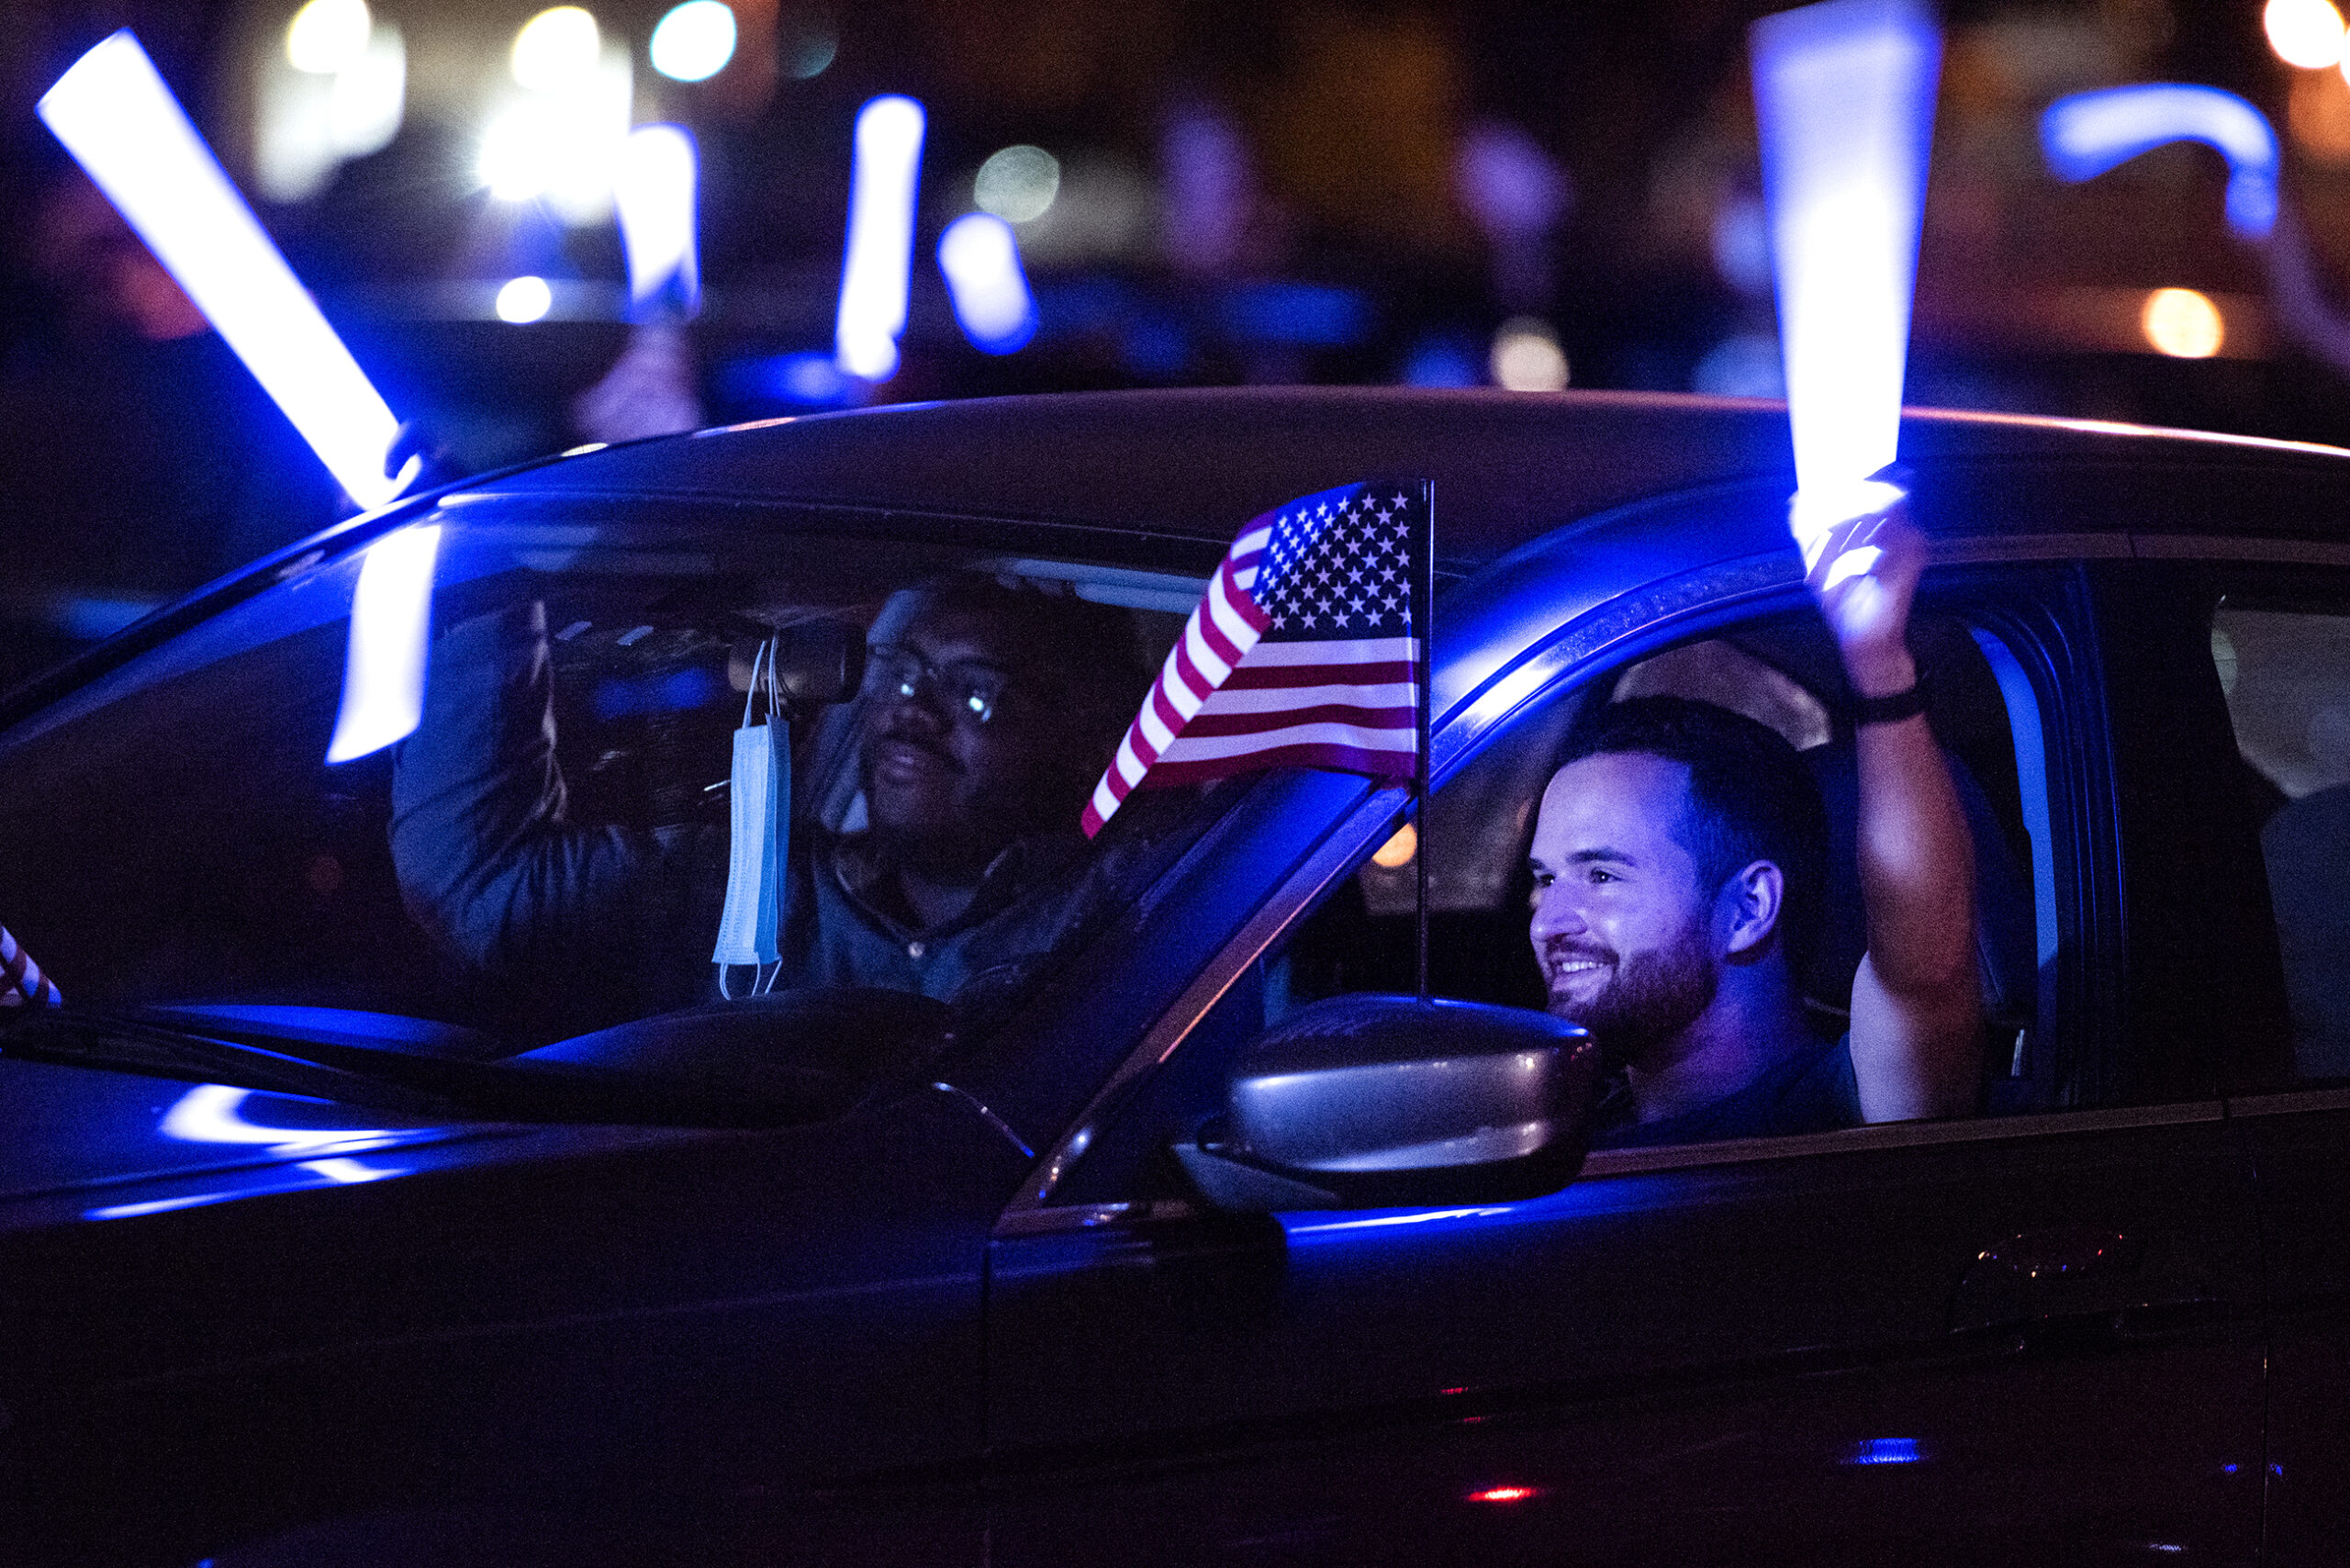 Blue light from a light stick illuminates a smiling man holding an American flag inside his car